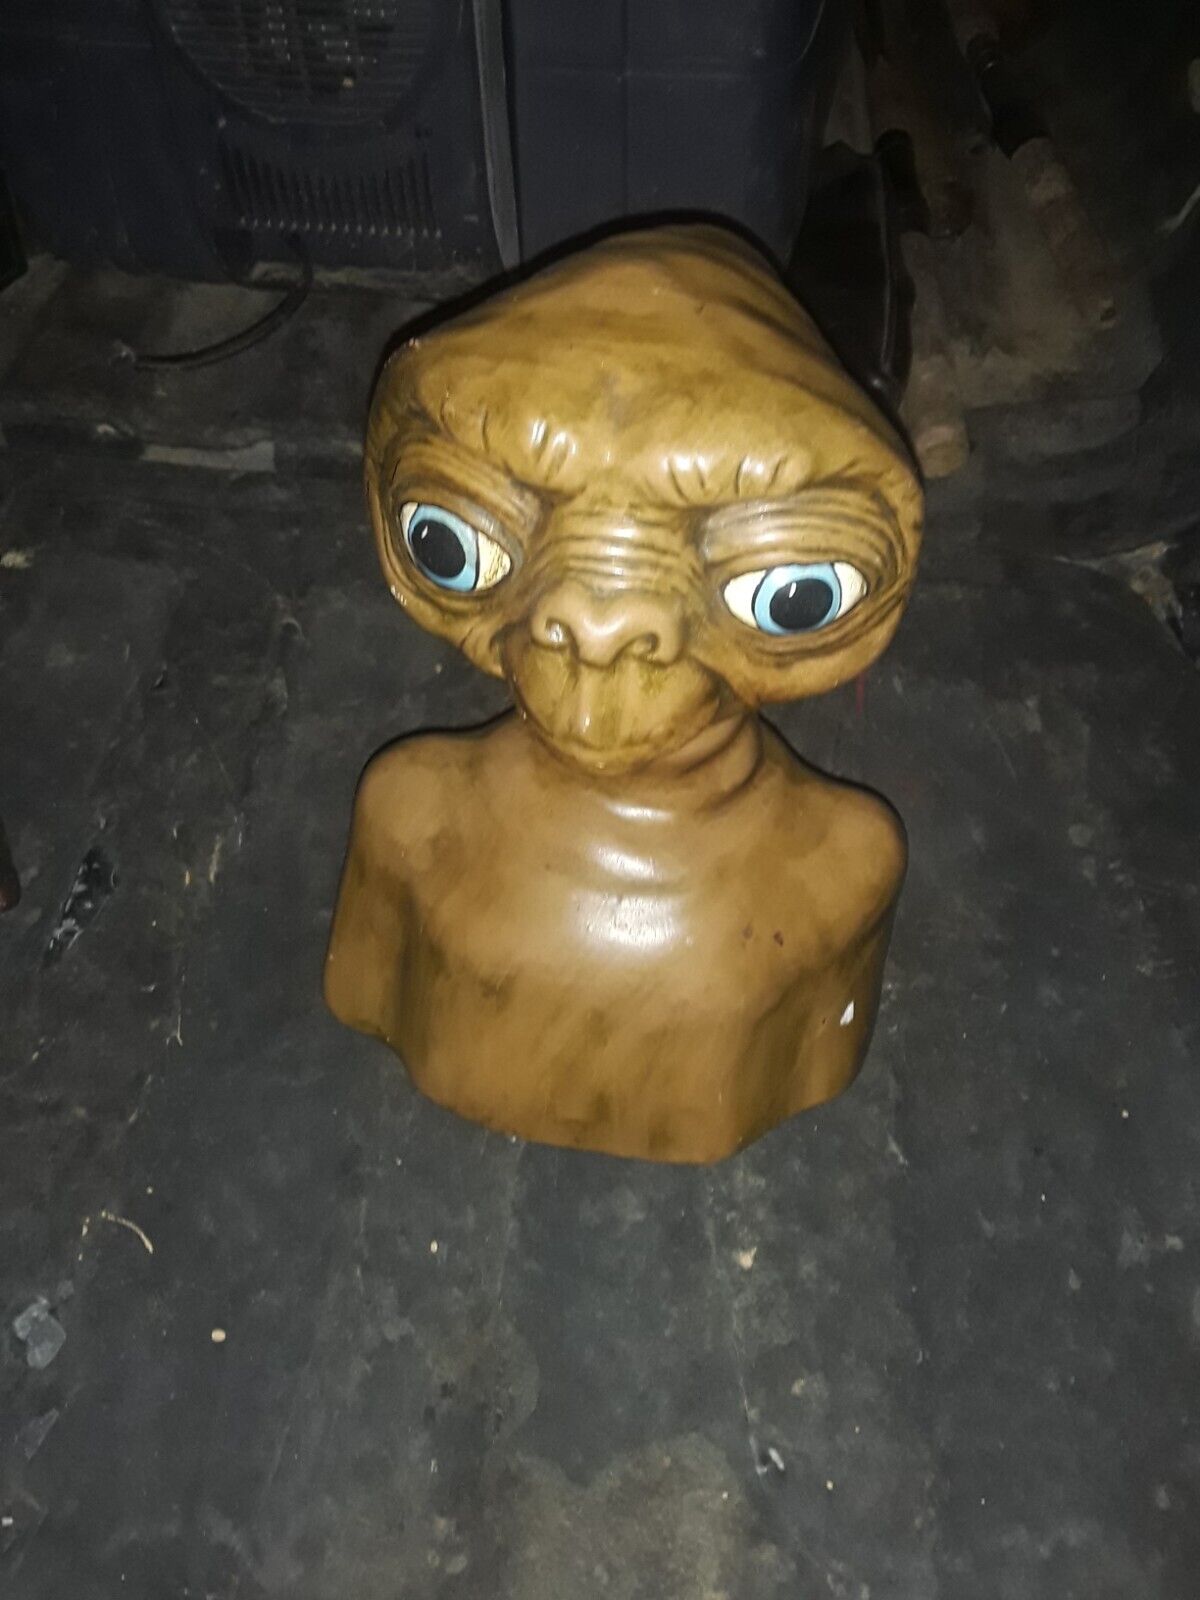 Vintage Porcelain E.T. Bust, Possibly custom made 1-off with personalization 